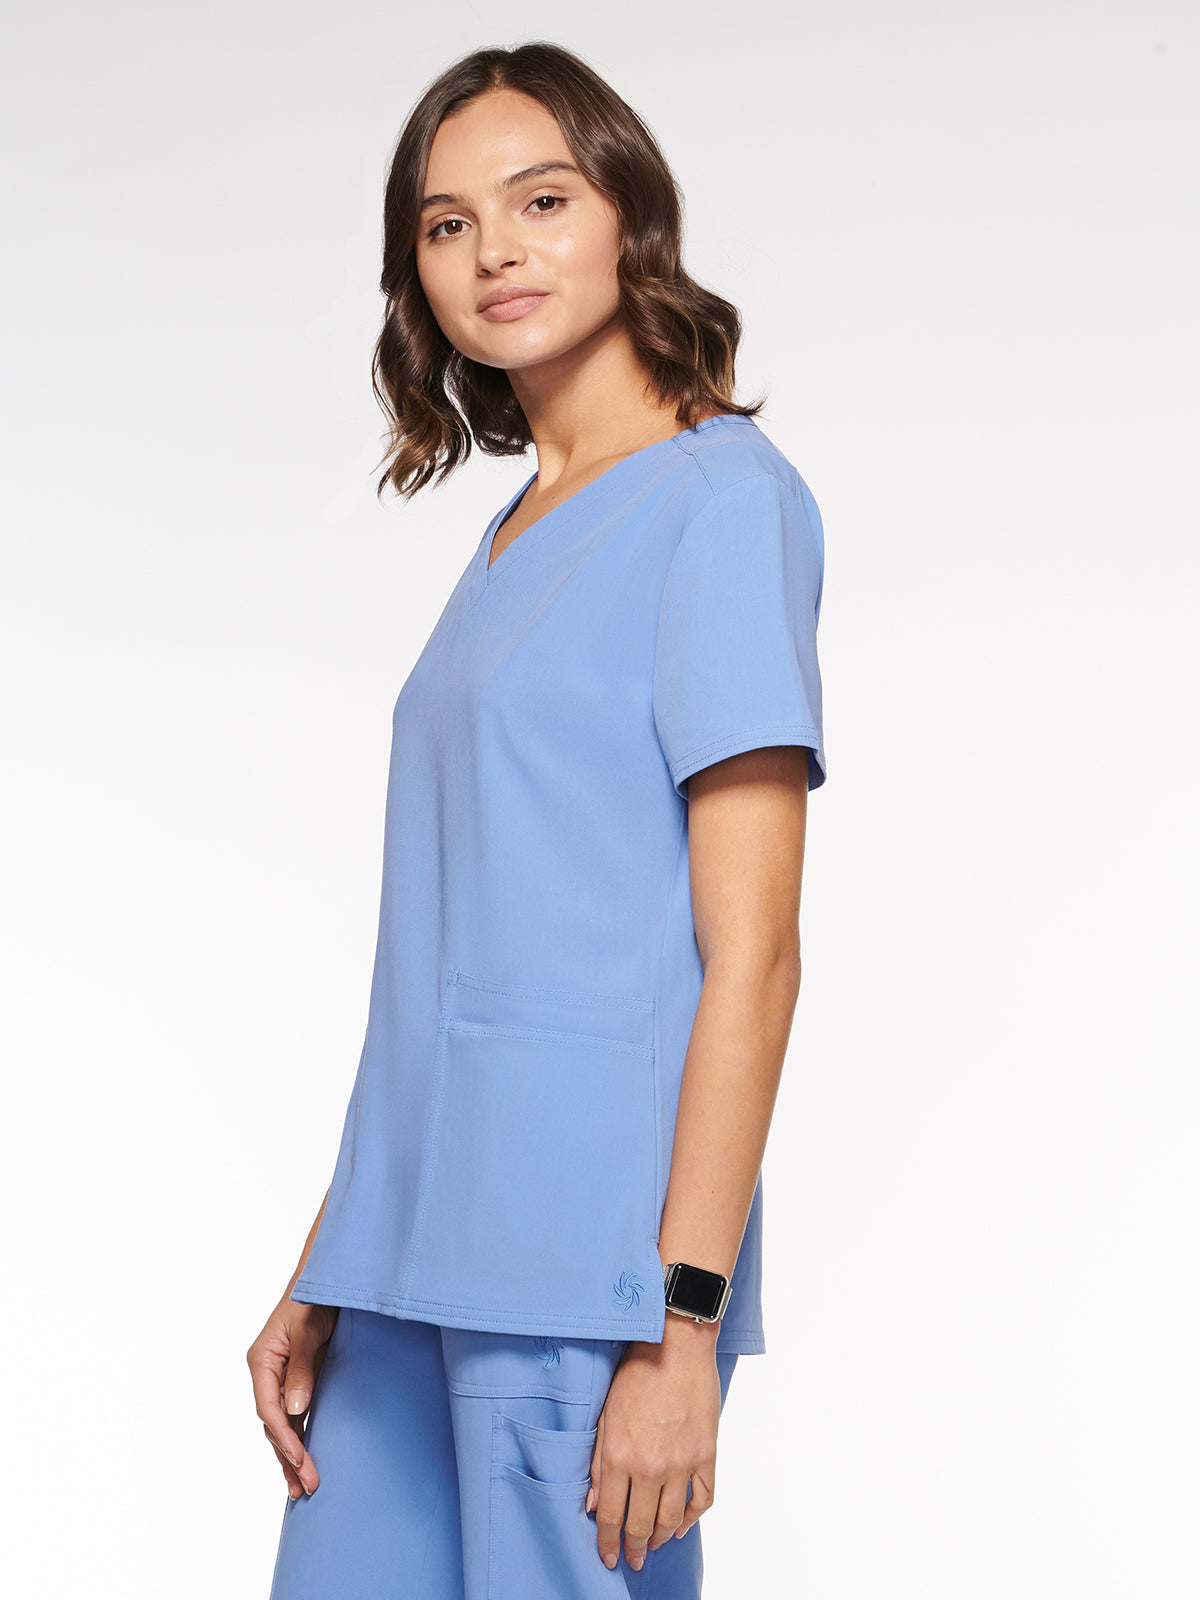 Nile Womens Top Classic V-Neck with 6 Pockets (94001)